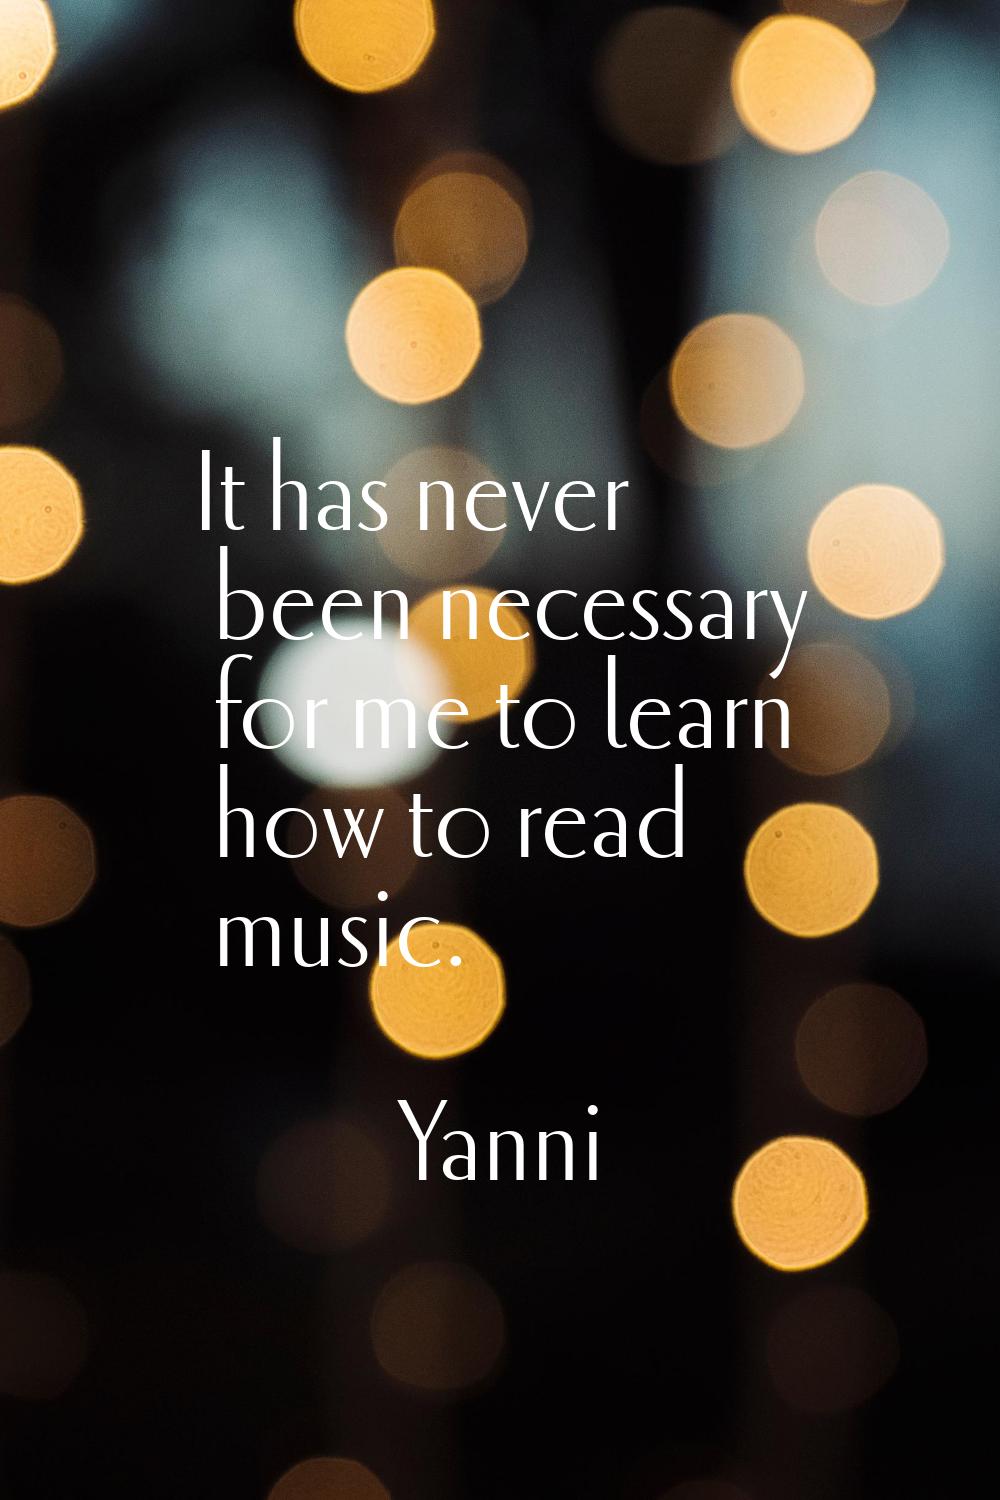 It has never been necessary for me to learn how to read music.